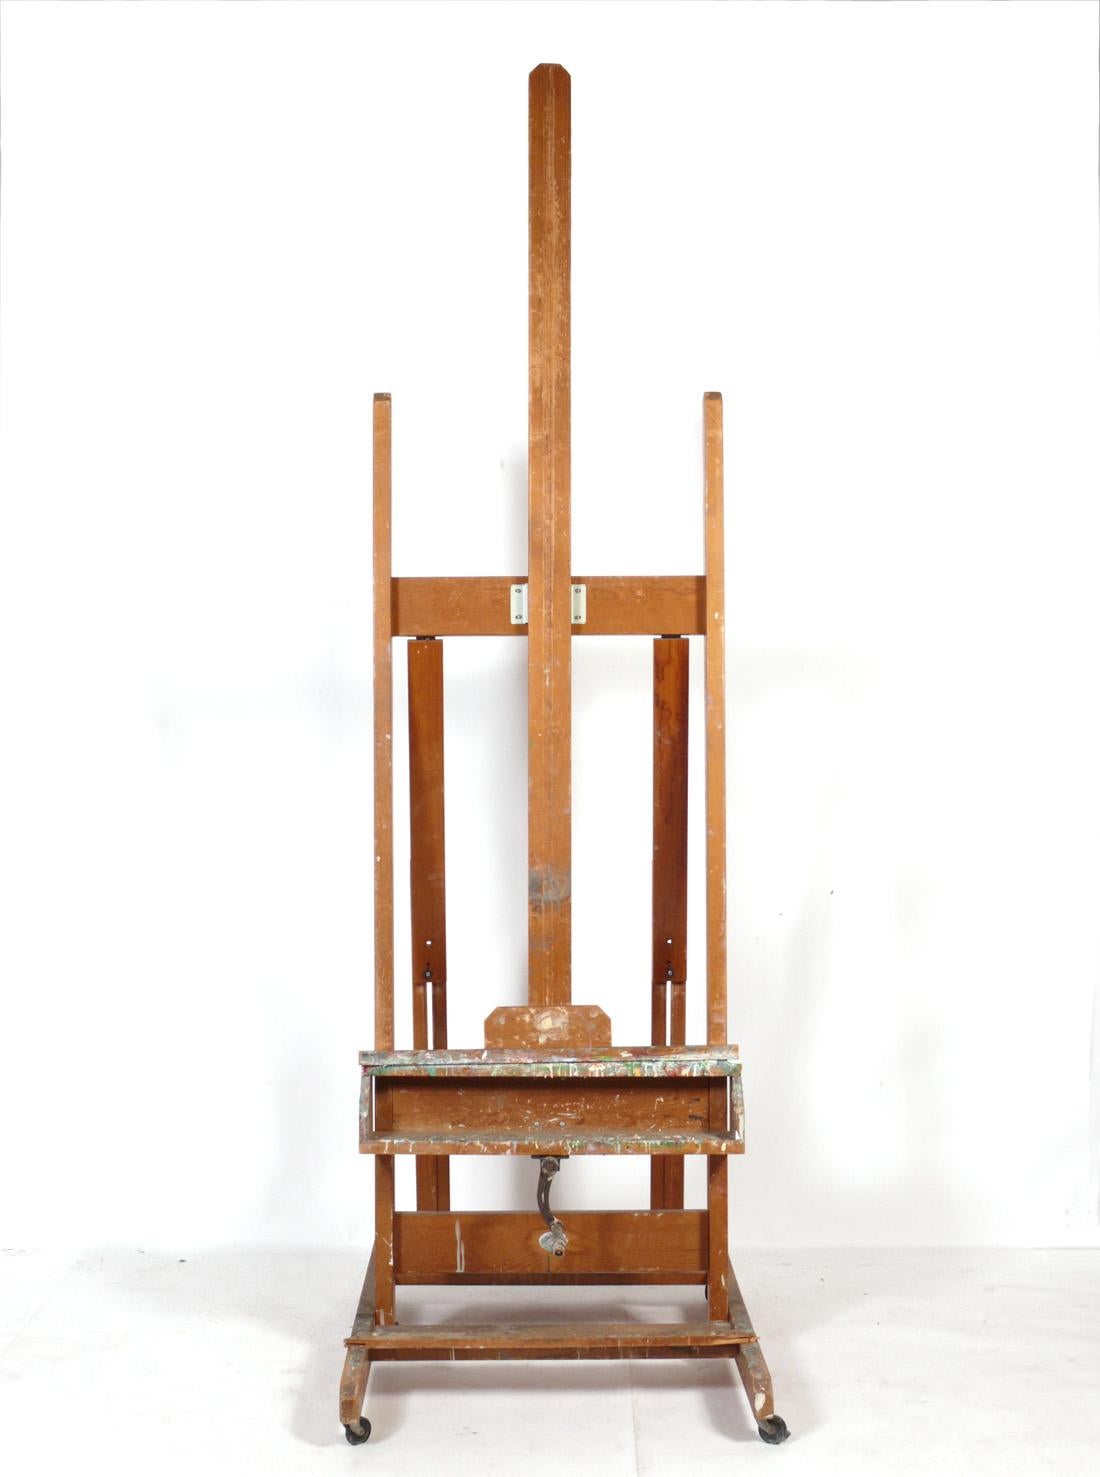 Paint covered Artist's wood easel, made by Anco Bilt of NY, American, circa 1960s. Retains beautiful original paint covered patina. It is a versatile size and can be used to paint with, or to display a painting or television. The shelf opening